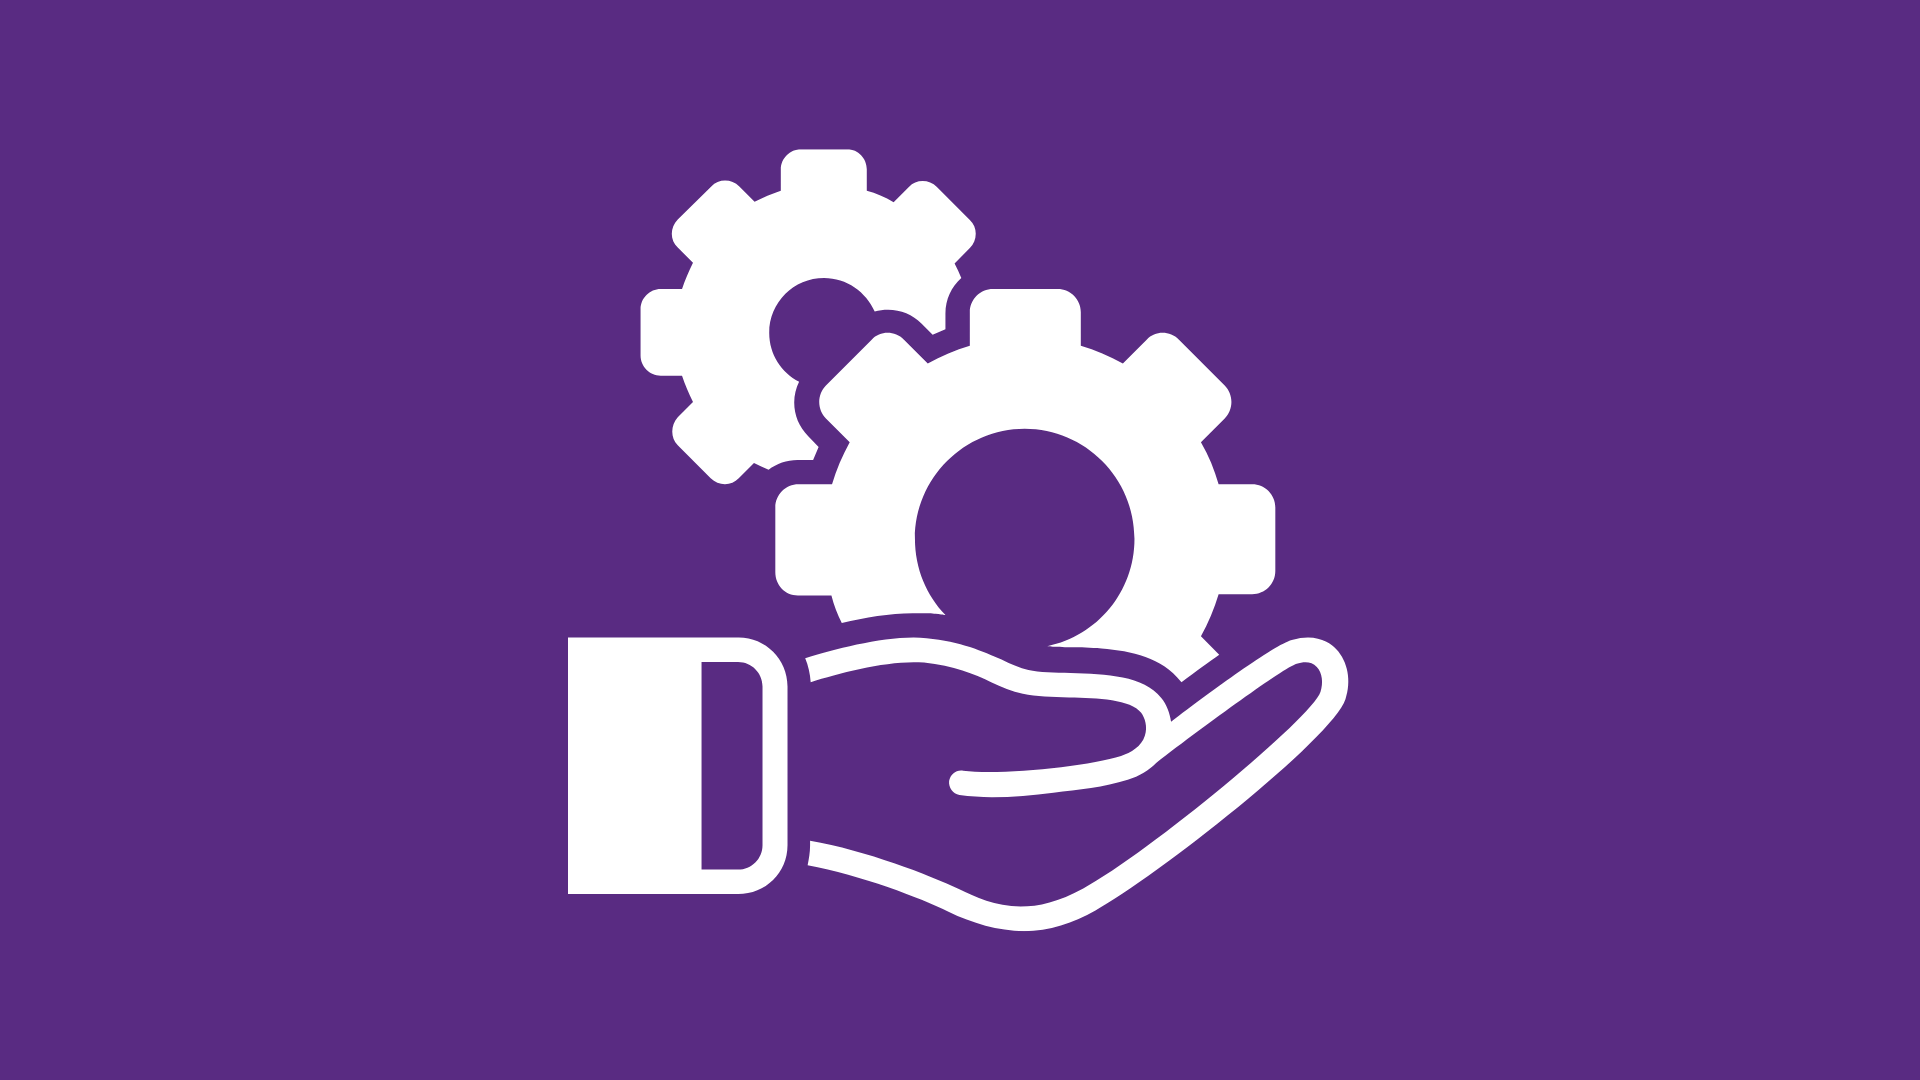 https://dbqfoundation.org/images/stories/Workforce_Icon.png